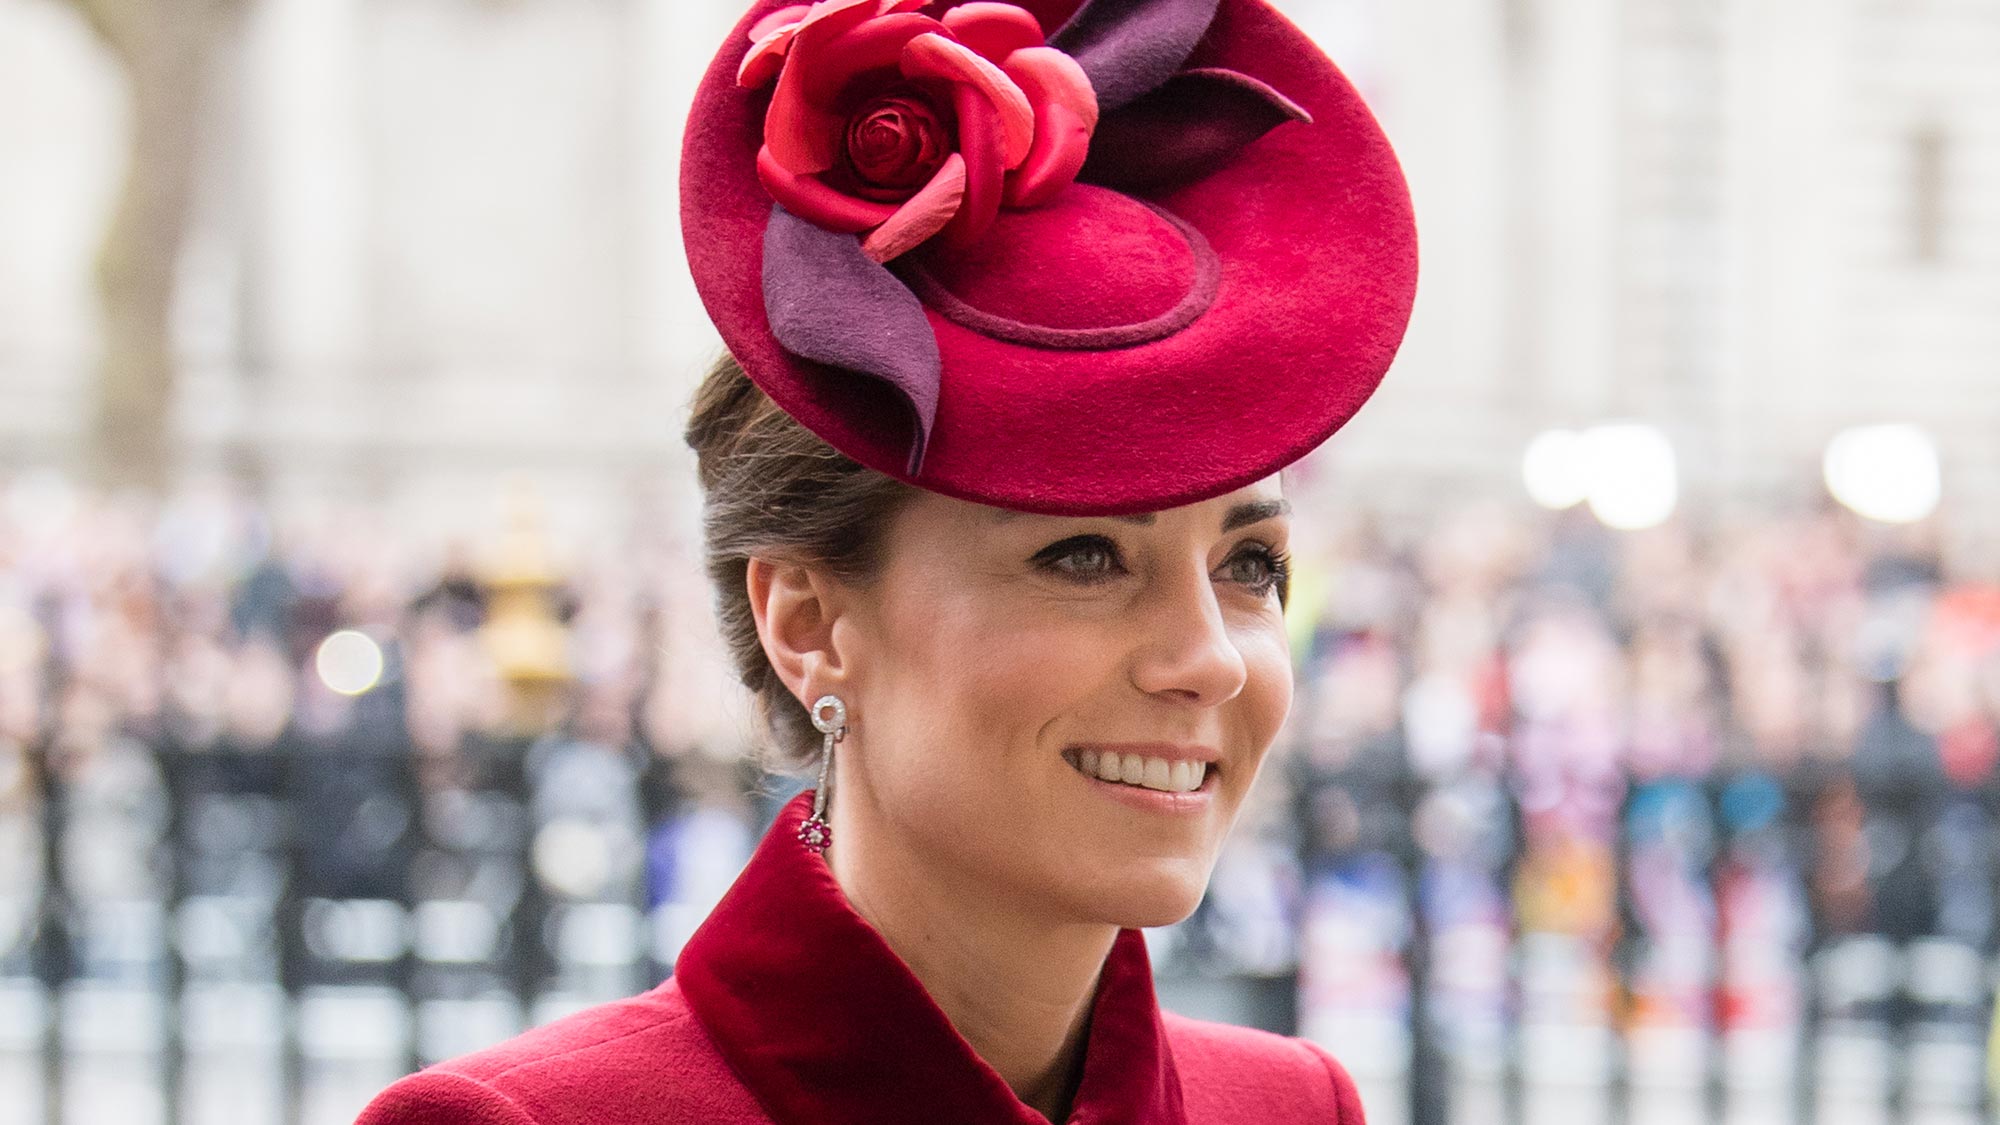 Kate Middleton is officially the most popular fashion influencer